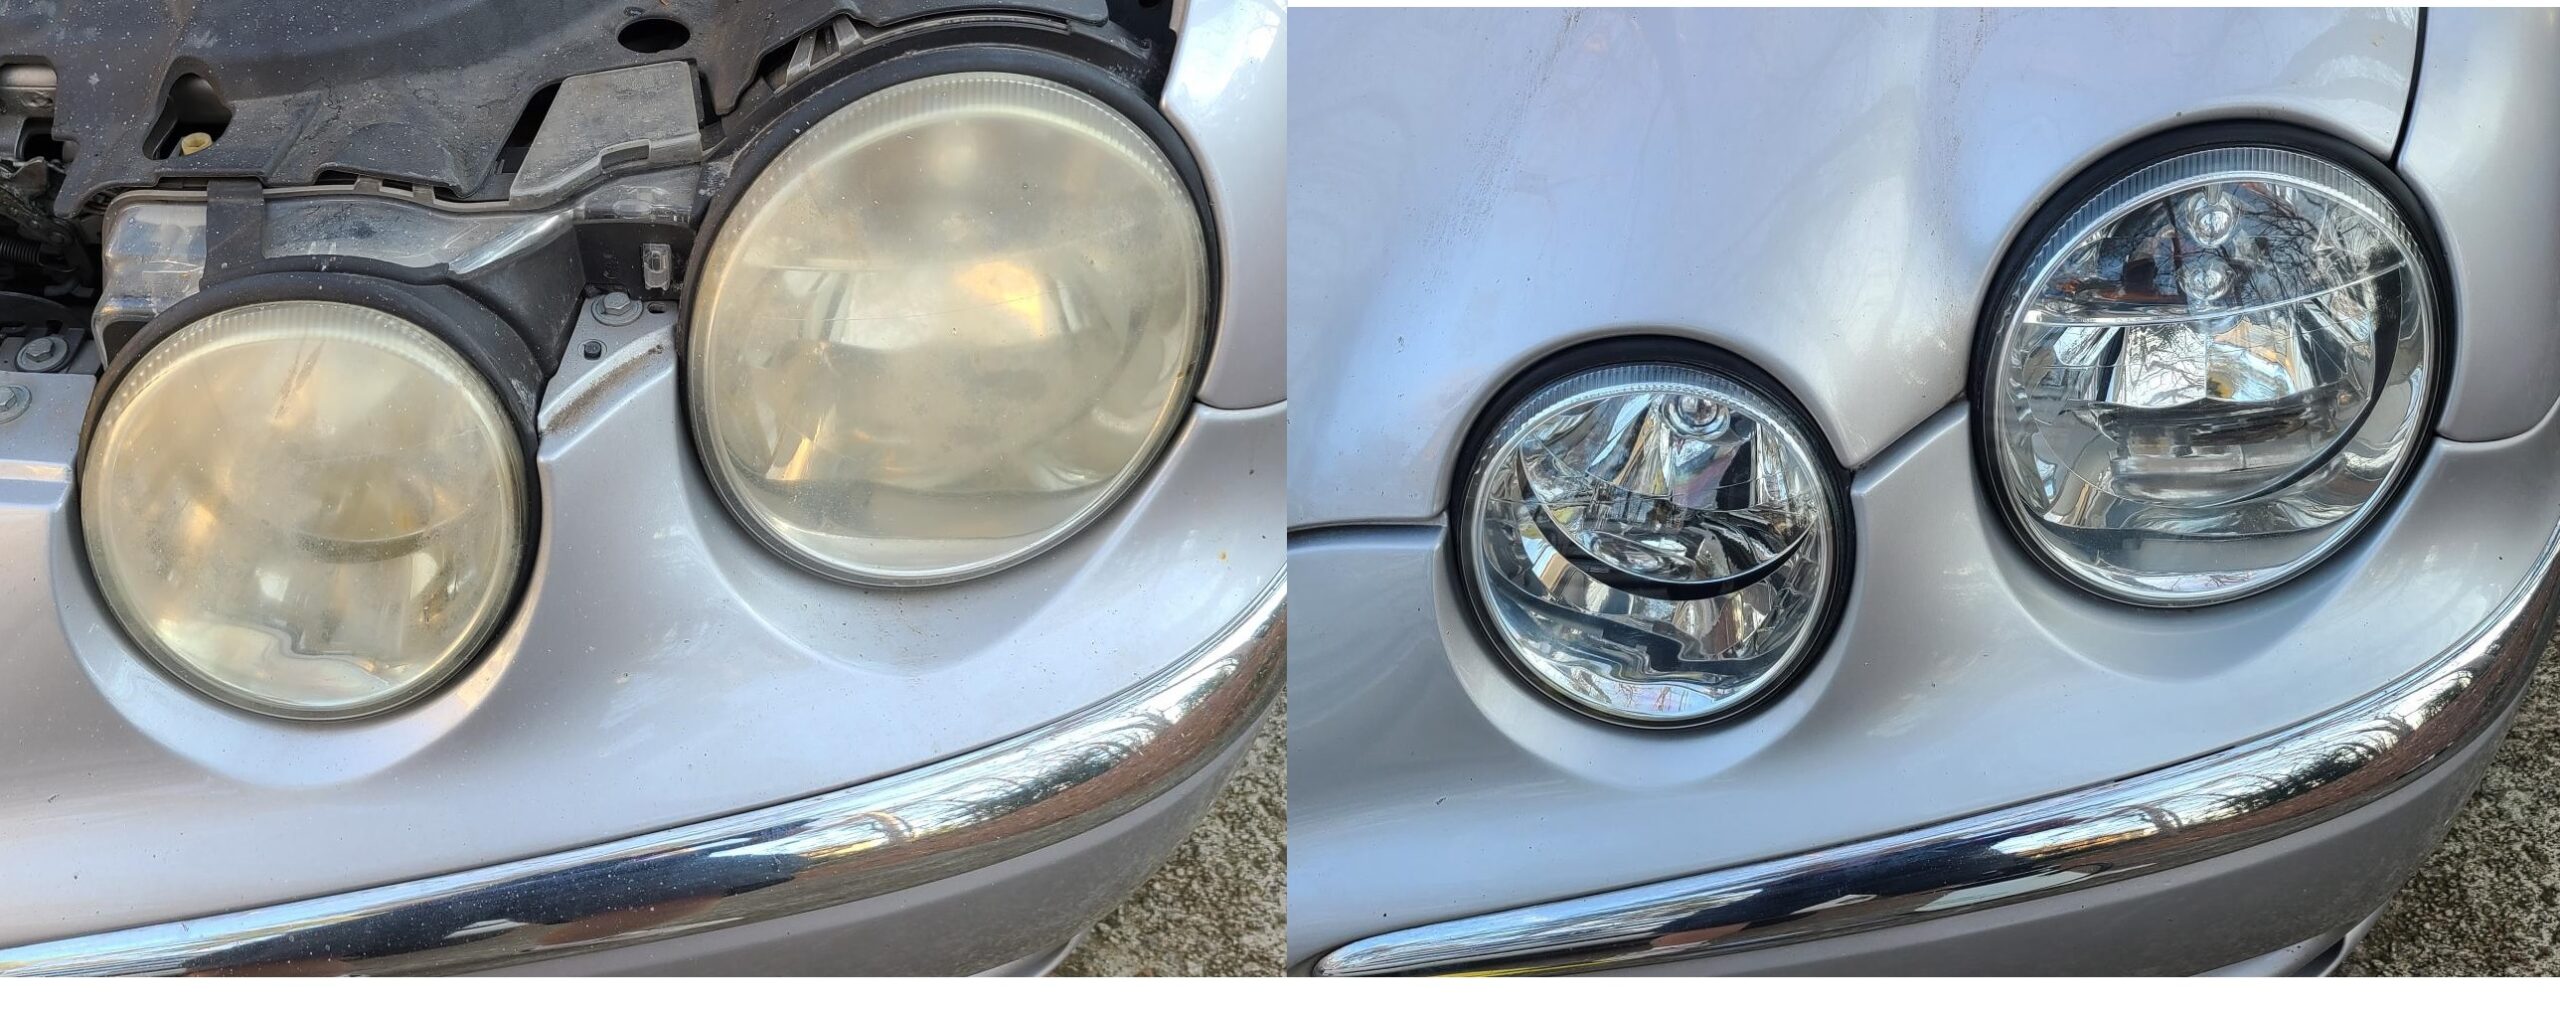 Headlight before and after restoration